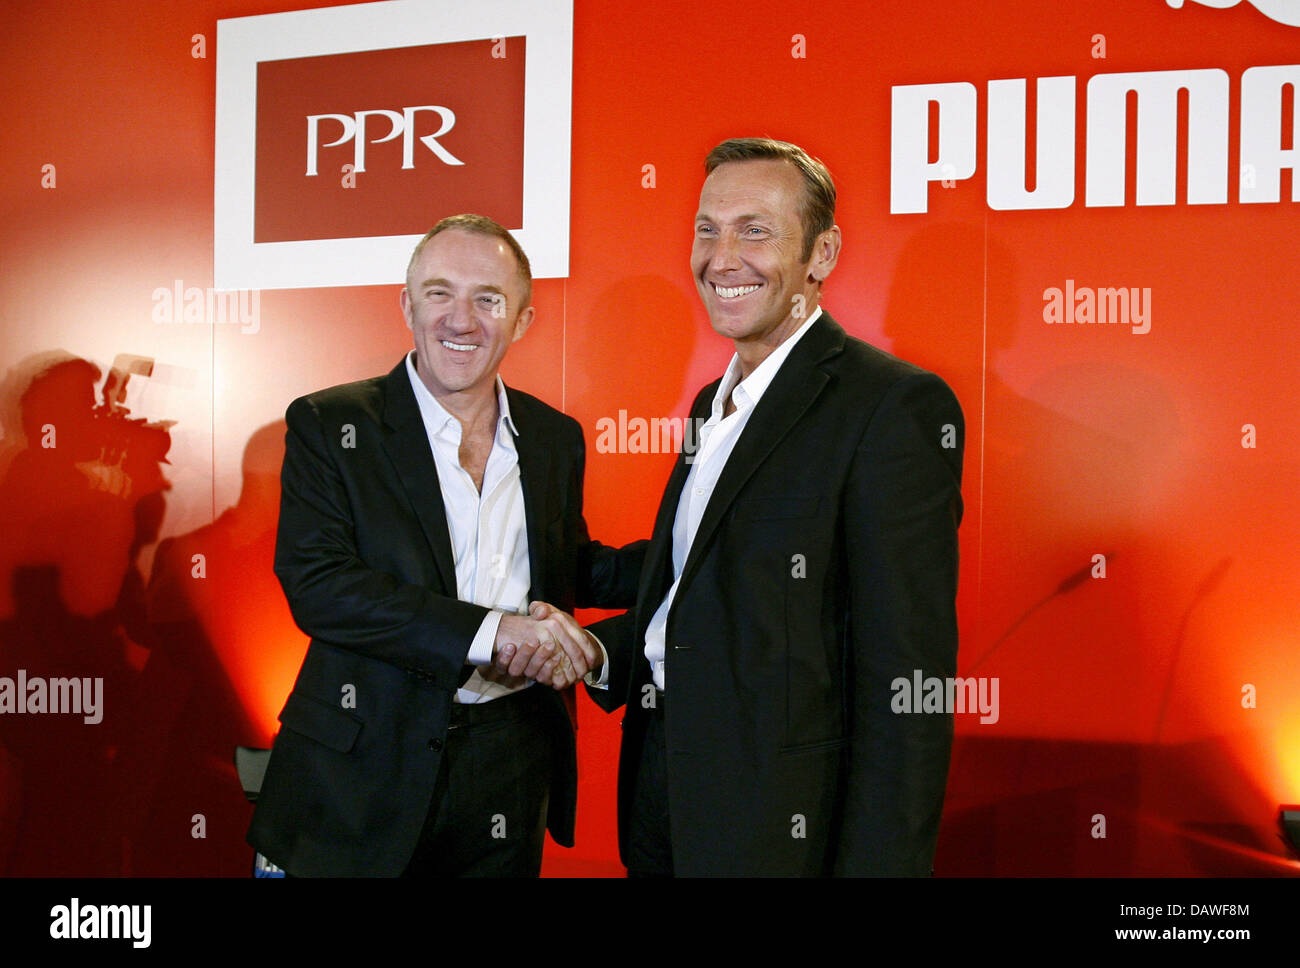 Puma AG CEO Jochen Zeitz (R) welcomes French luxury group  Pinault-Printemps-Redoute's (PPR) chairman Francois-Henri Pinault for a  press conference in Nuremberg, Germany, Thursday 12 April 2007. PPR, owner  of the Gucci and